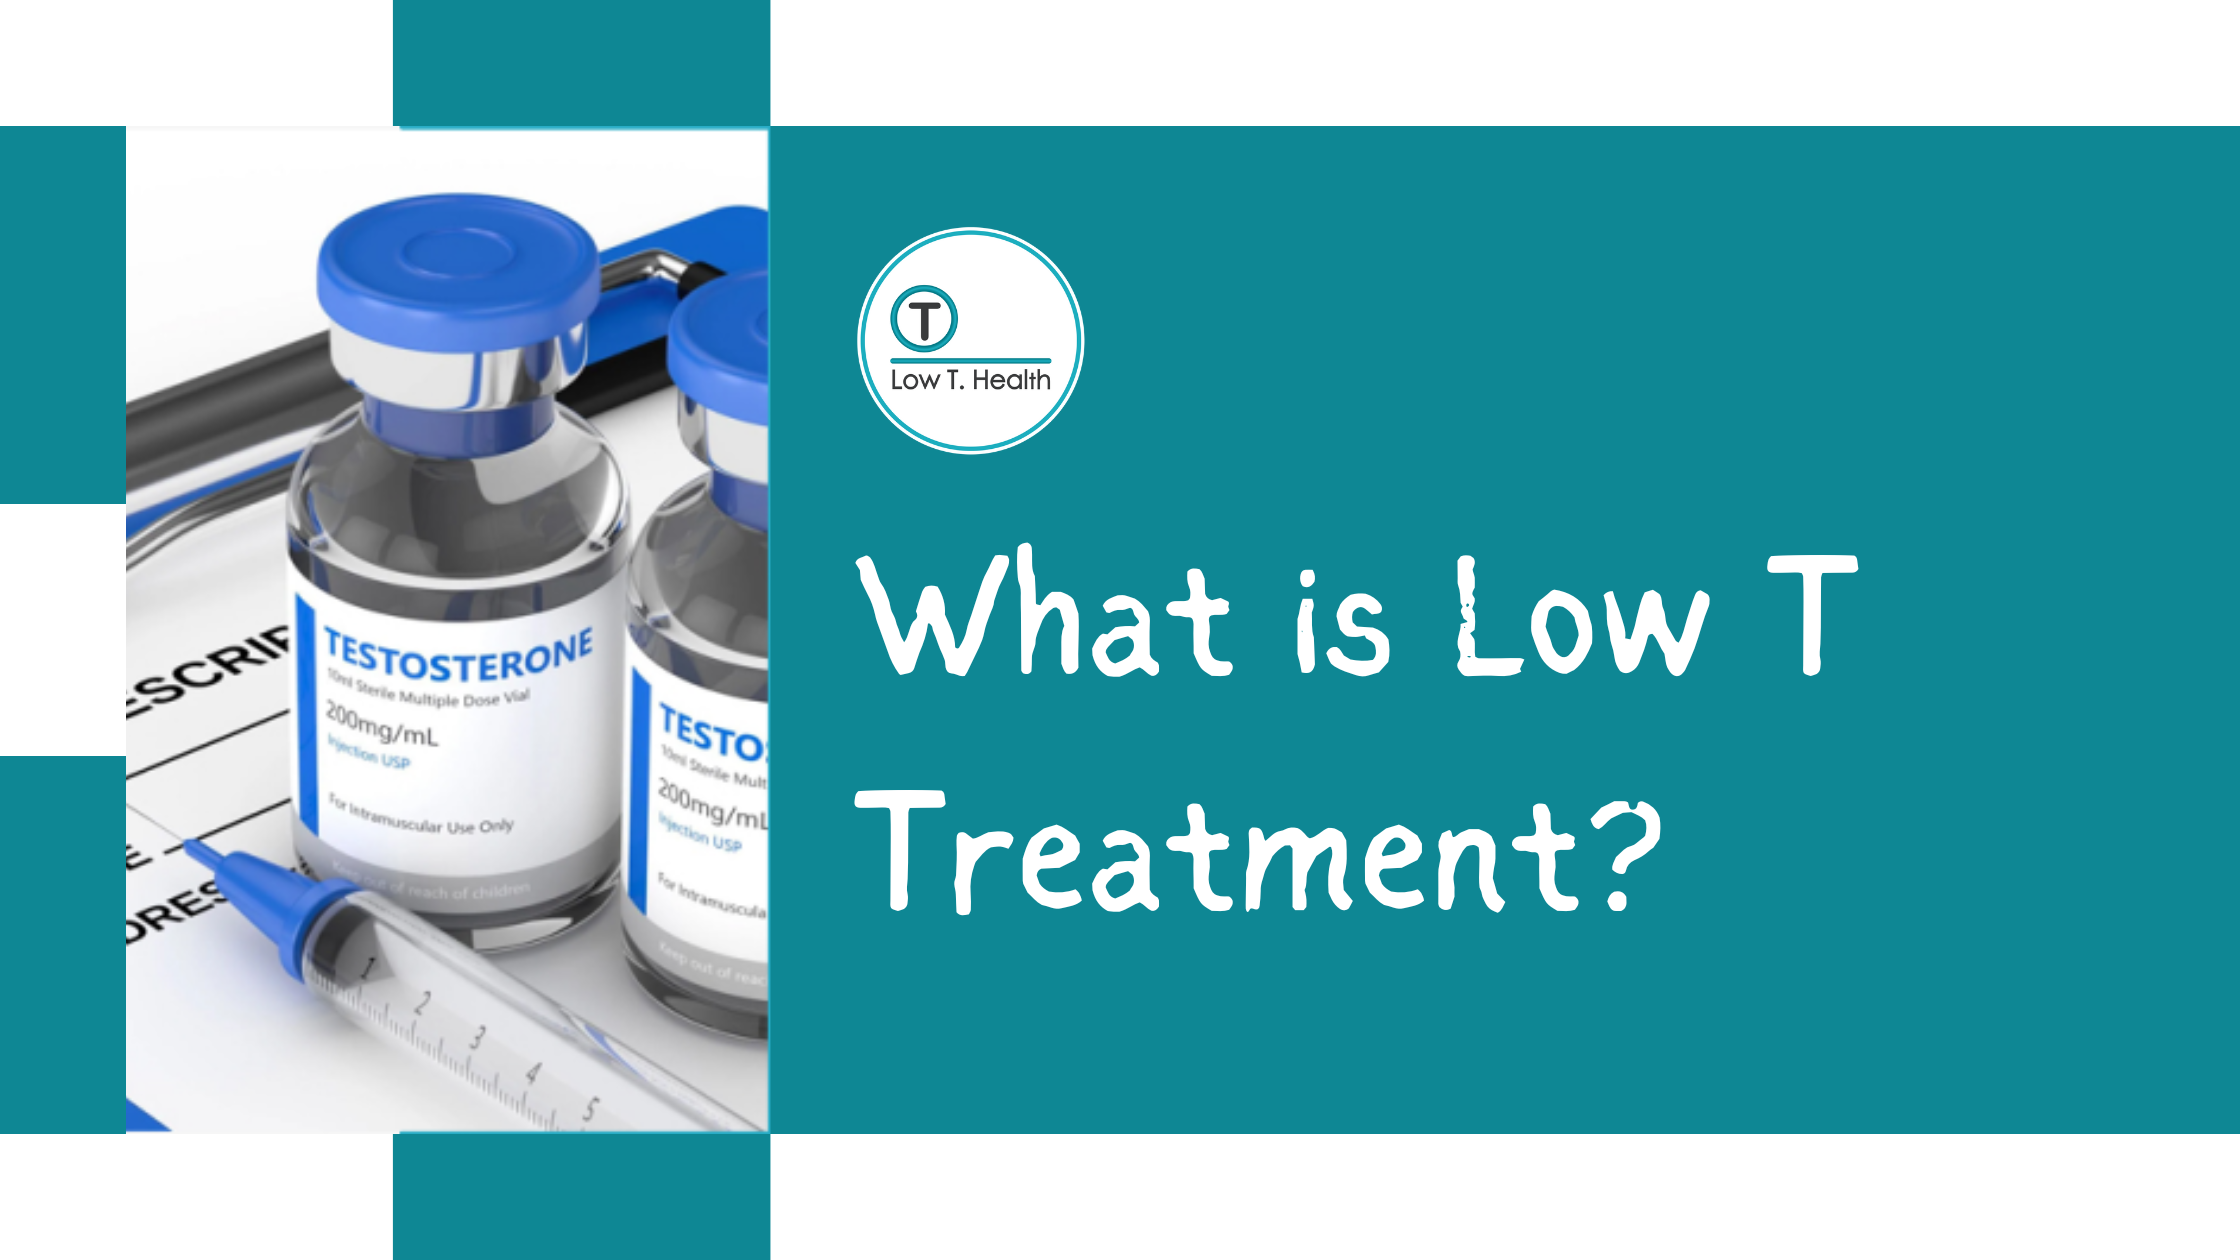 What is Low T Treatment?